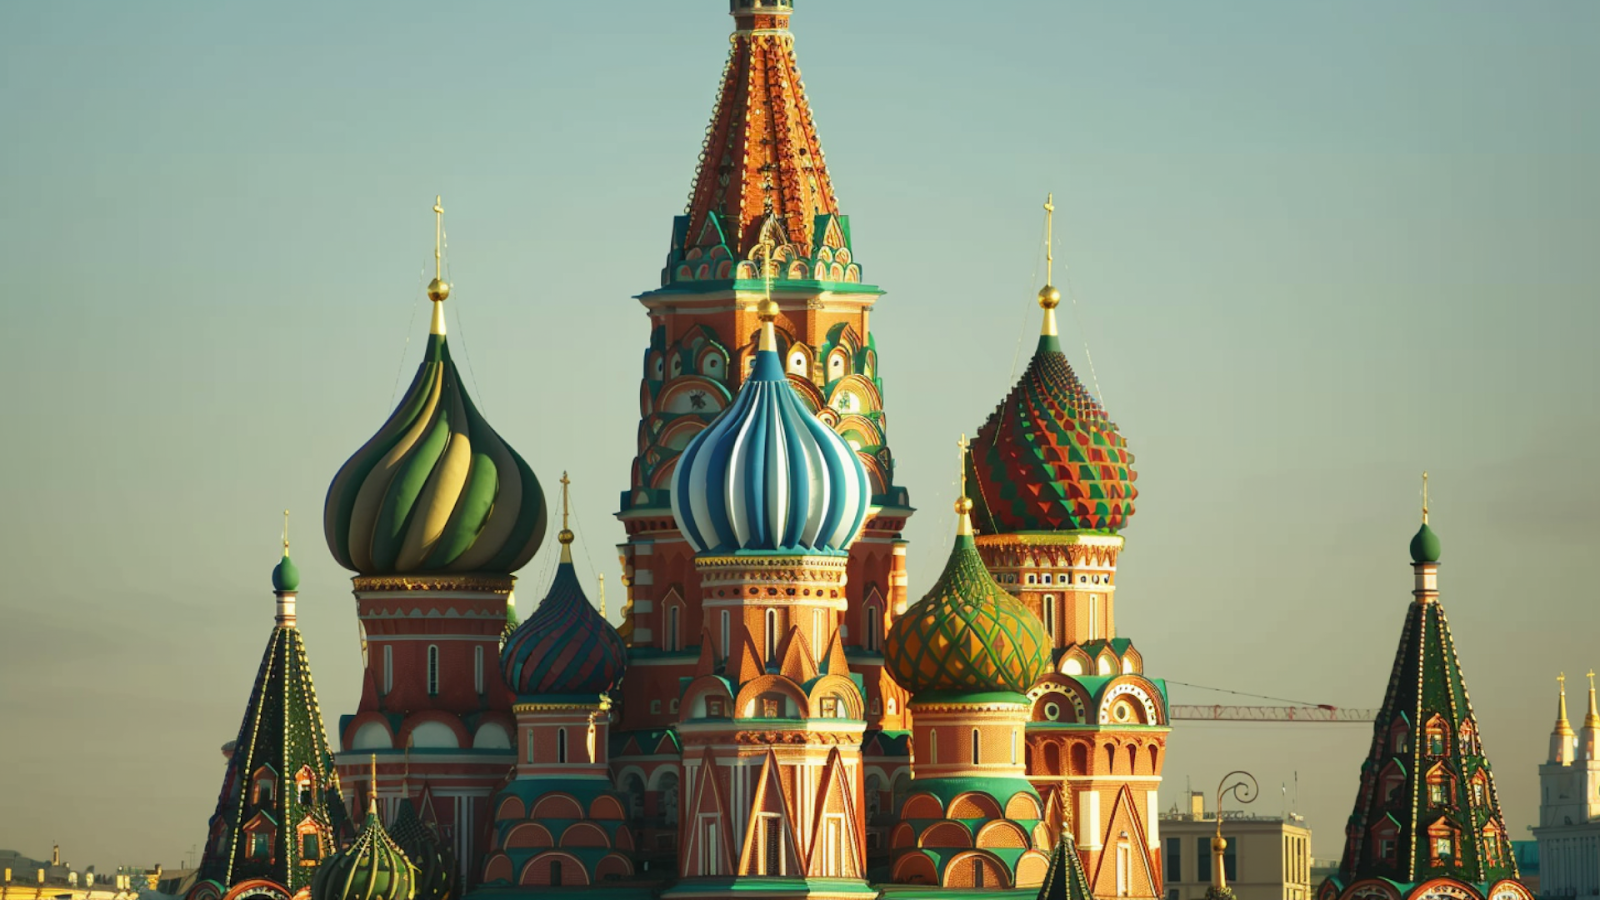 The St. Basil’s Cathedral in Moscow